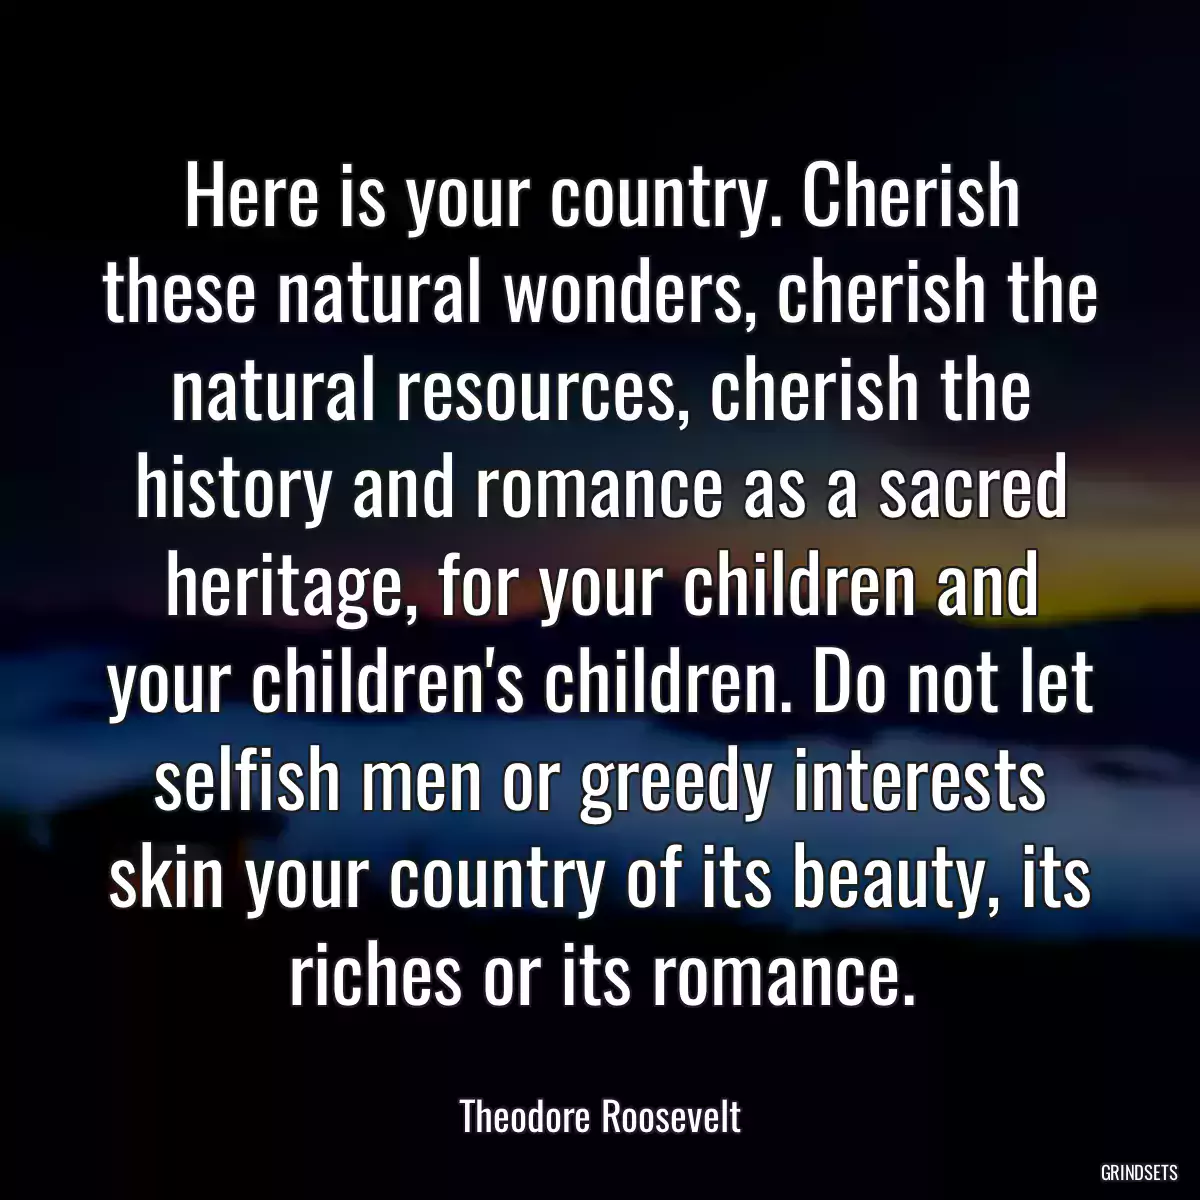 Here is your country. Cherish these natural wonders, cherish the natural resources, cherish the history and romance as a sacred heritage, for your children and your children\'s children. Do not let selfish men or greedy interests skin your country of its beauty, its riches or its romance.